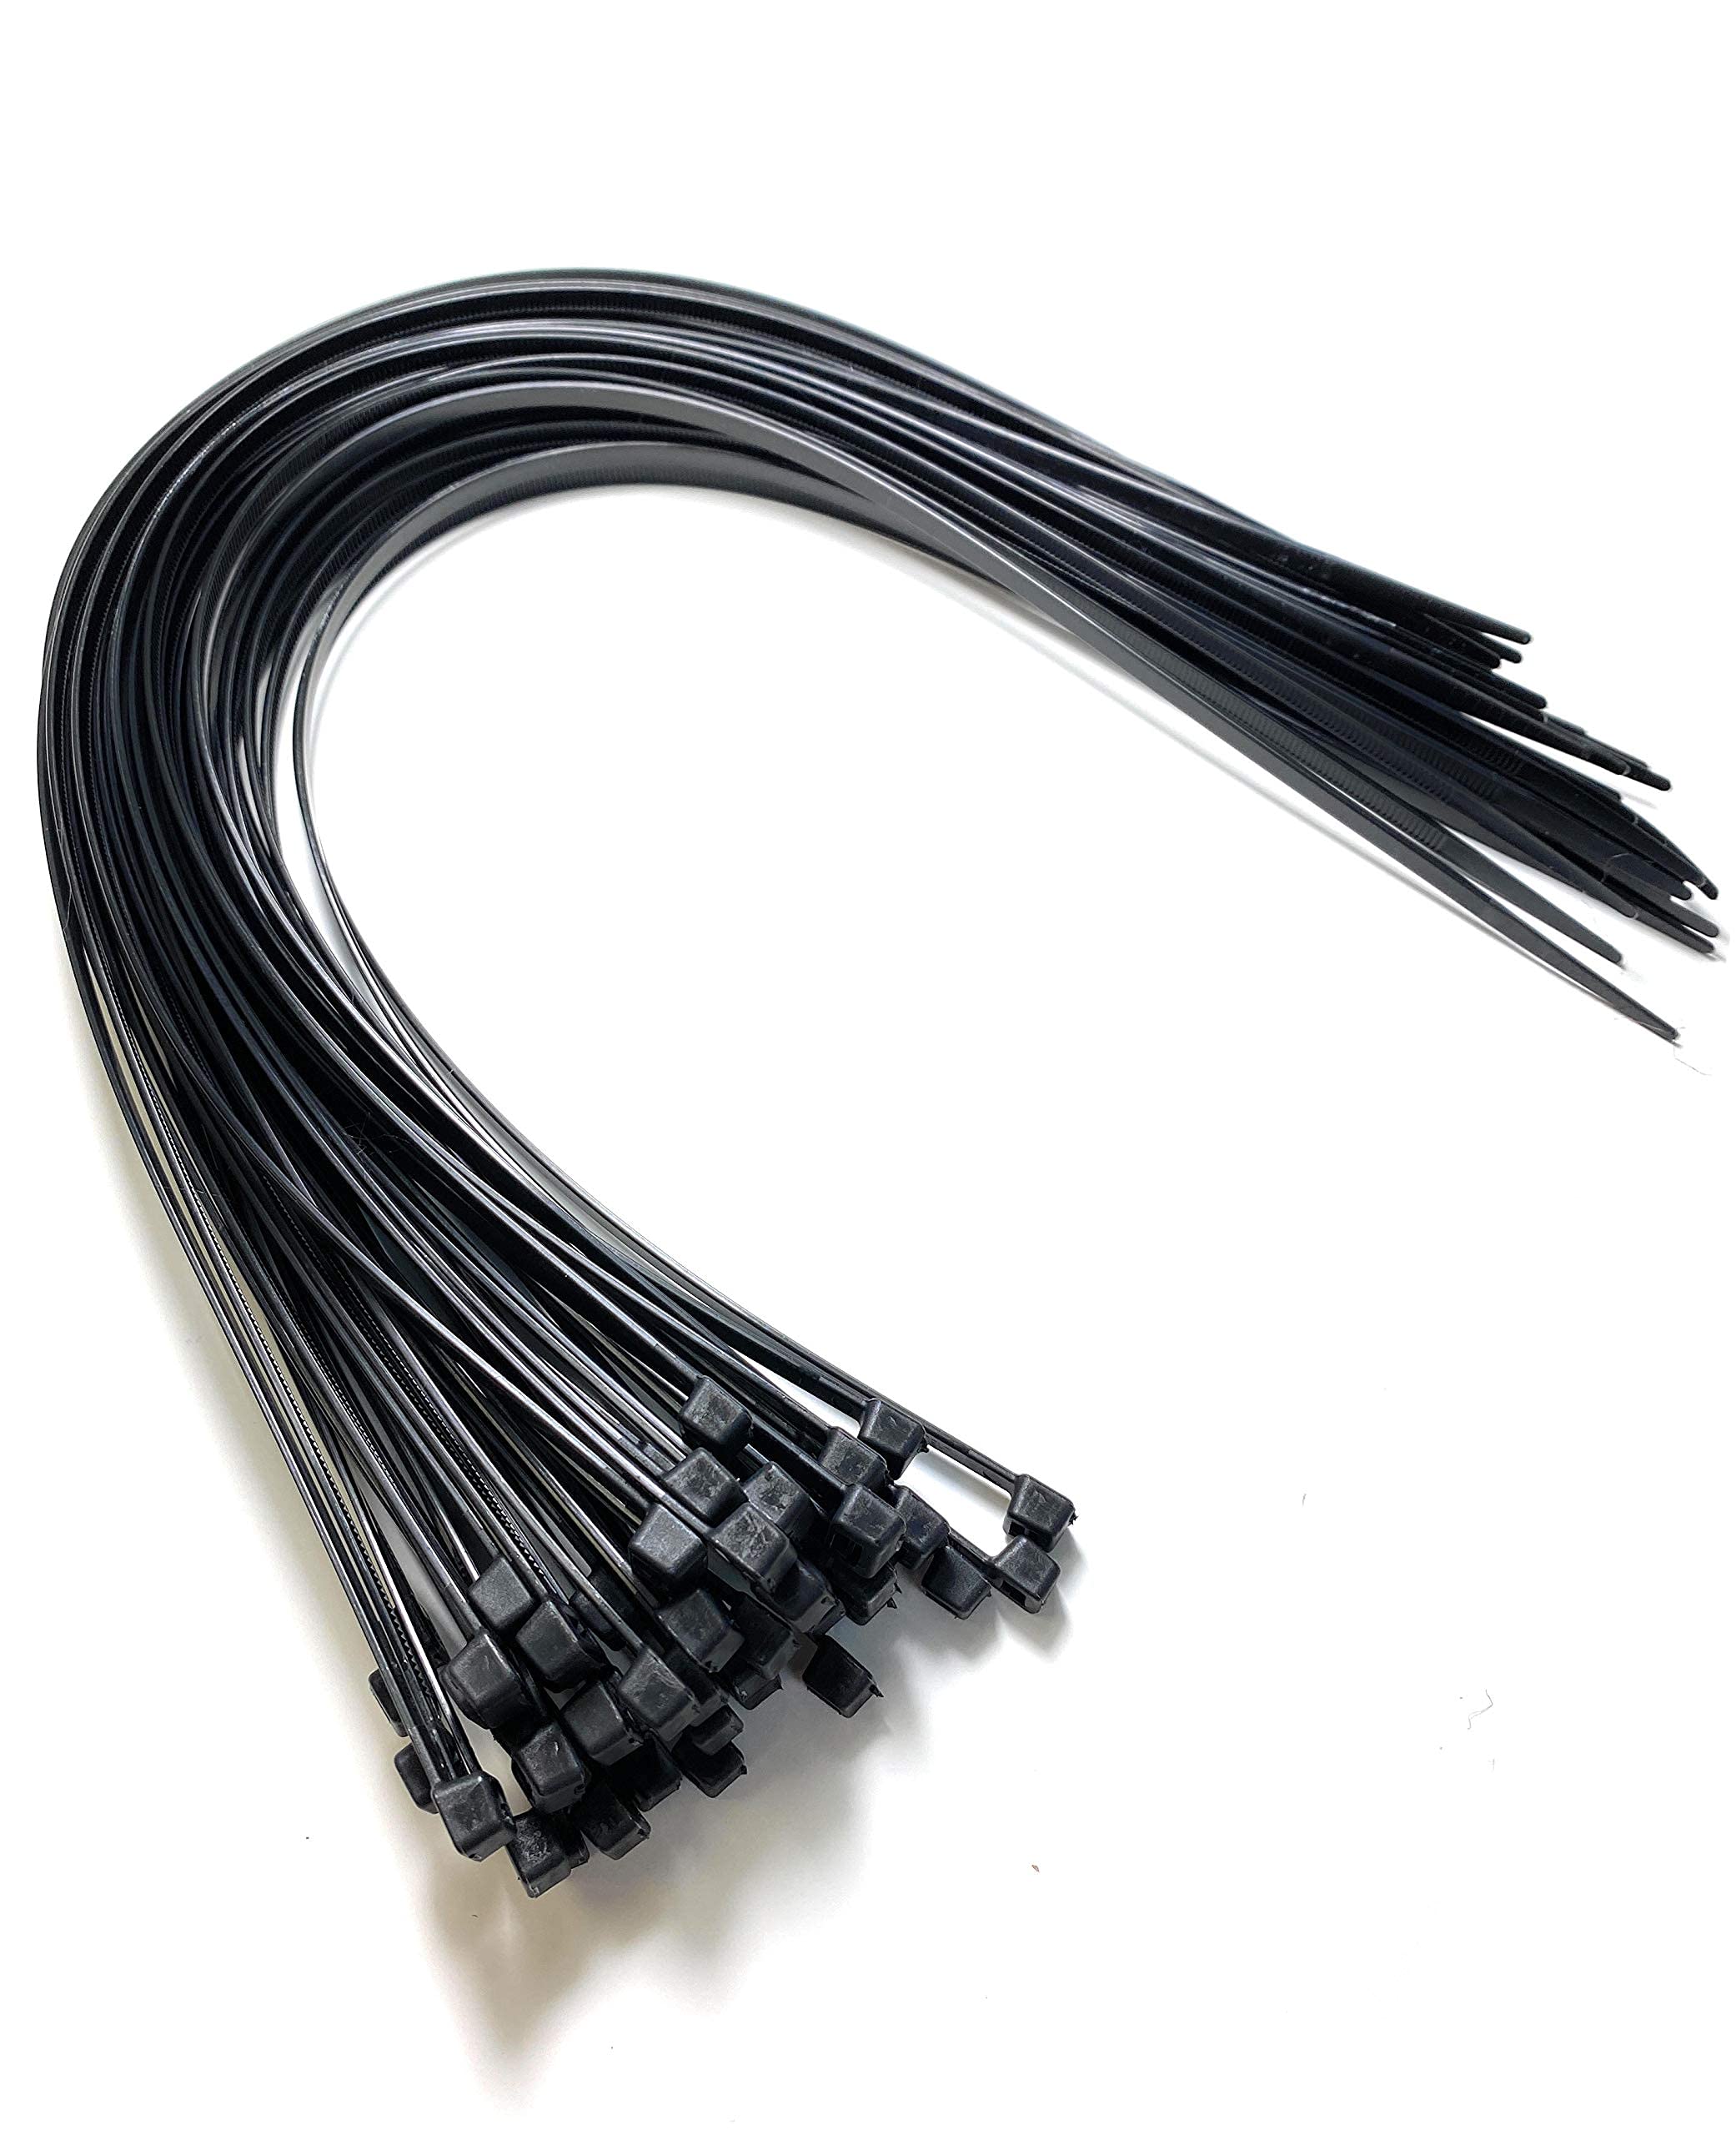 Cable Ties 10mm Electric Cable Ties Black -China- 5 nos 250mm Utilities